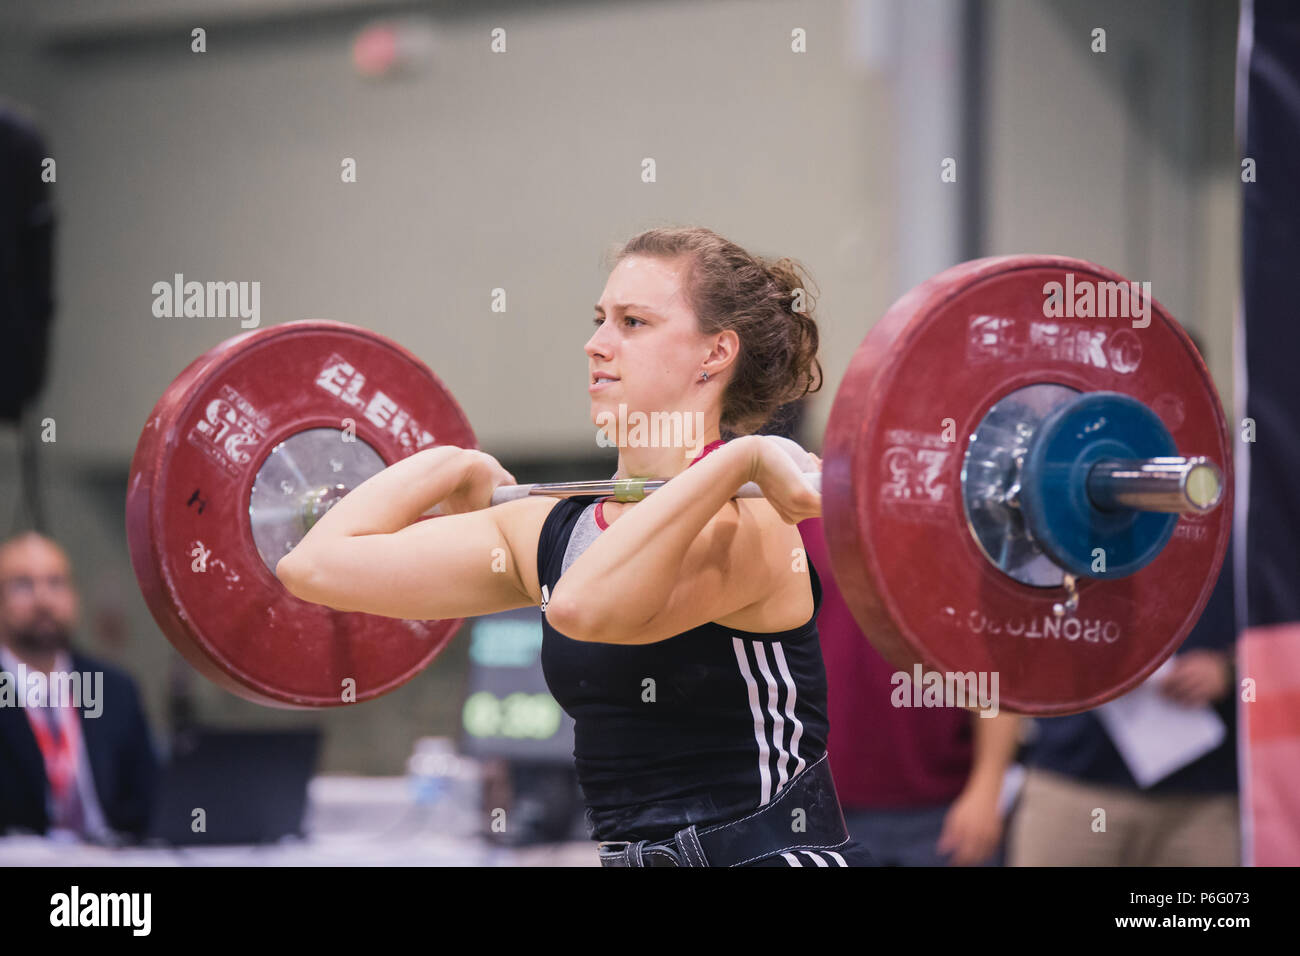 woman weight lifting competition Stock Photo